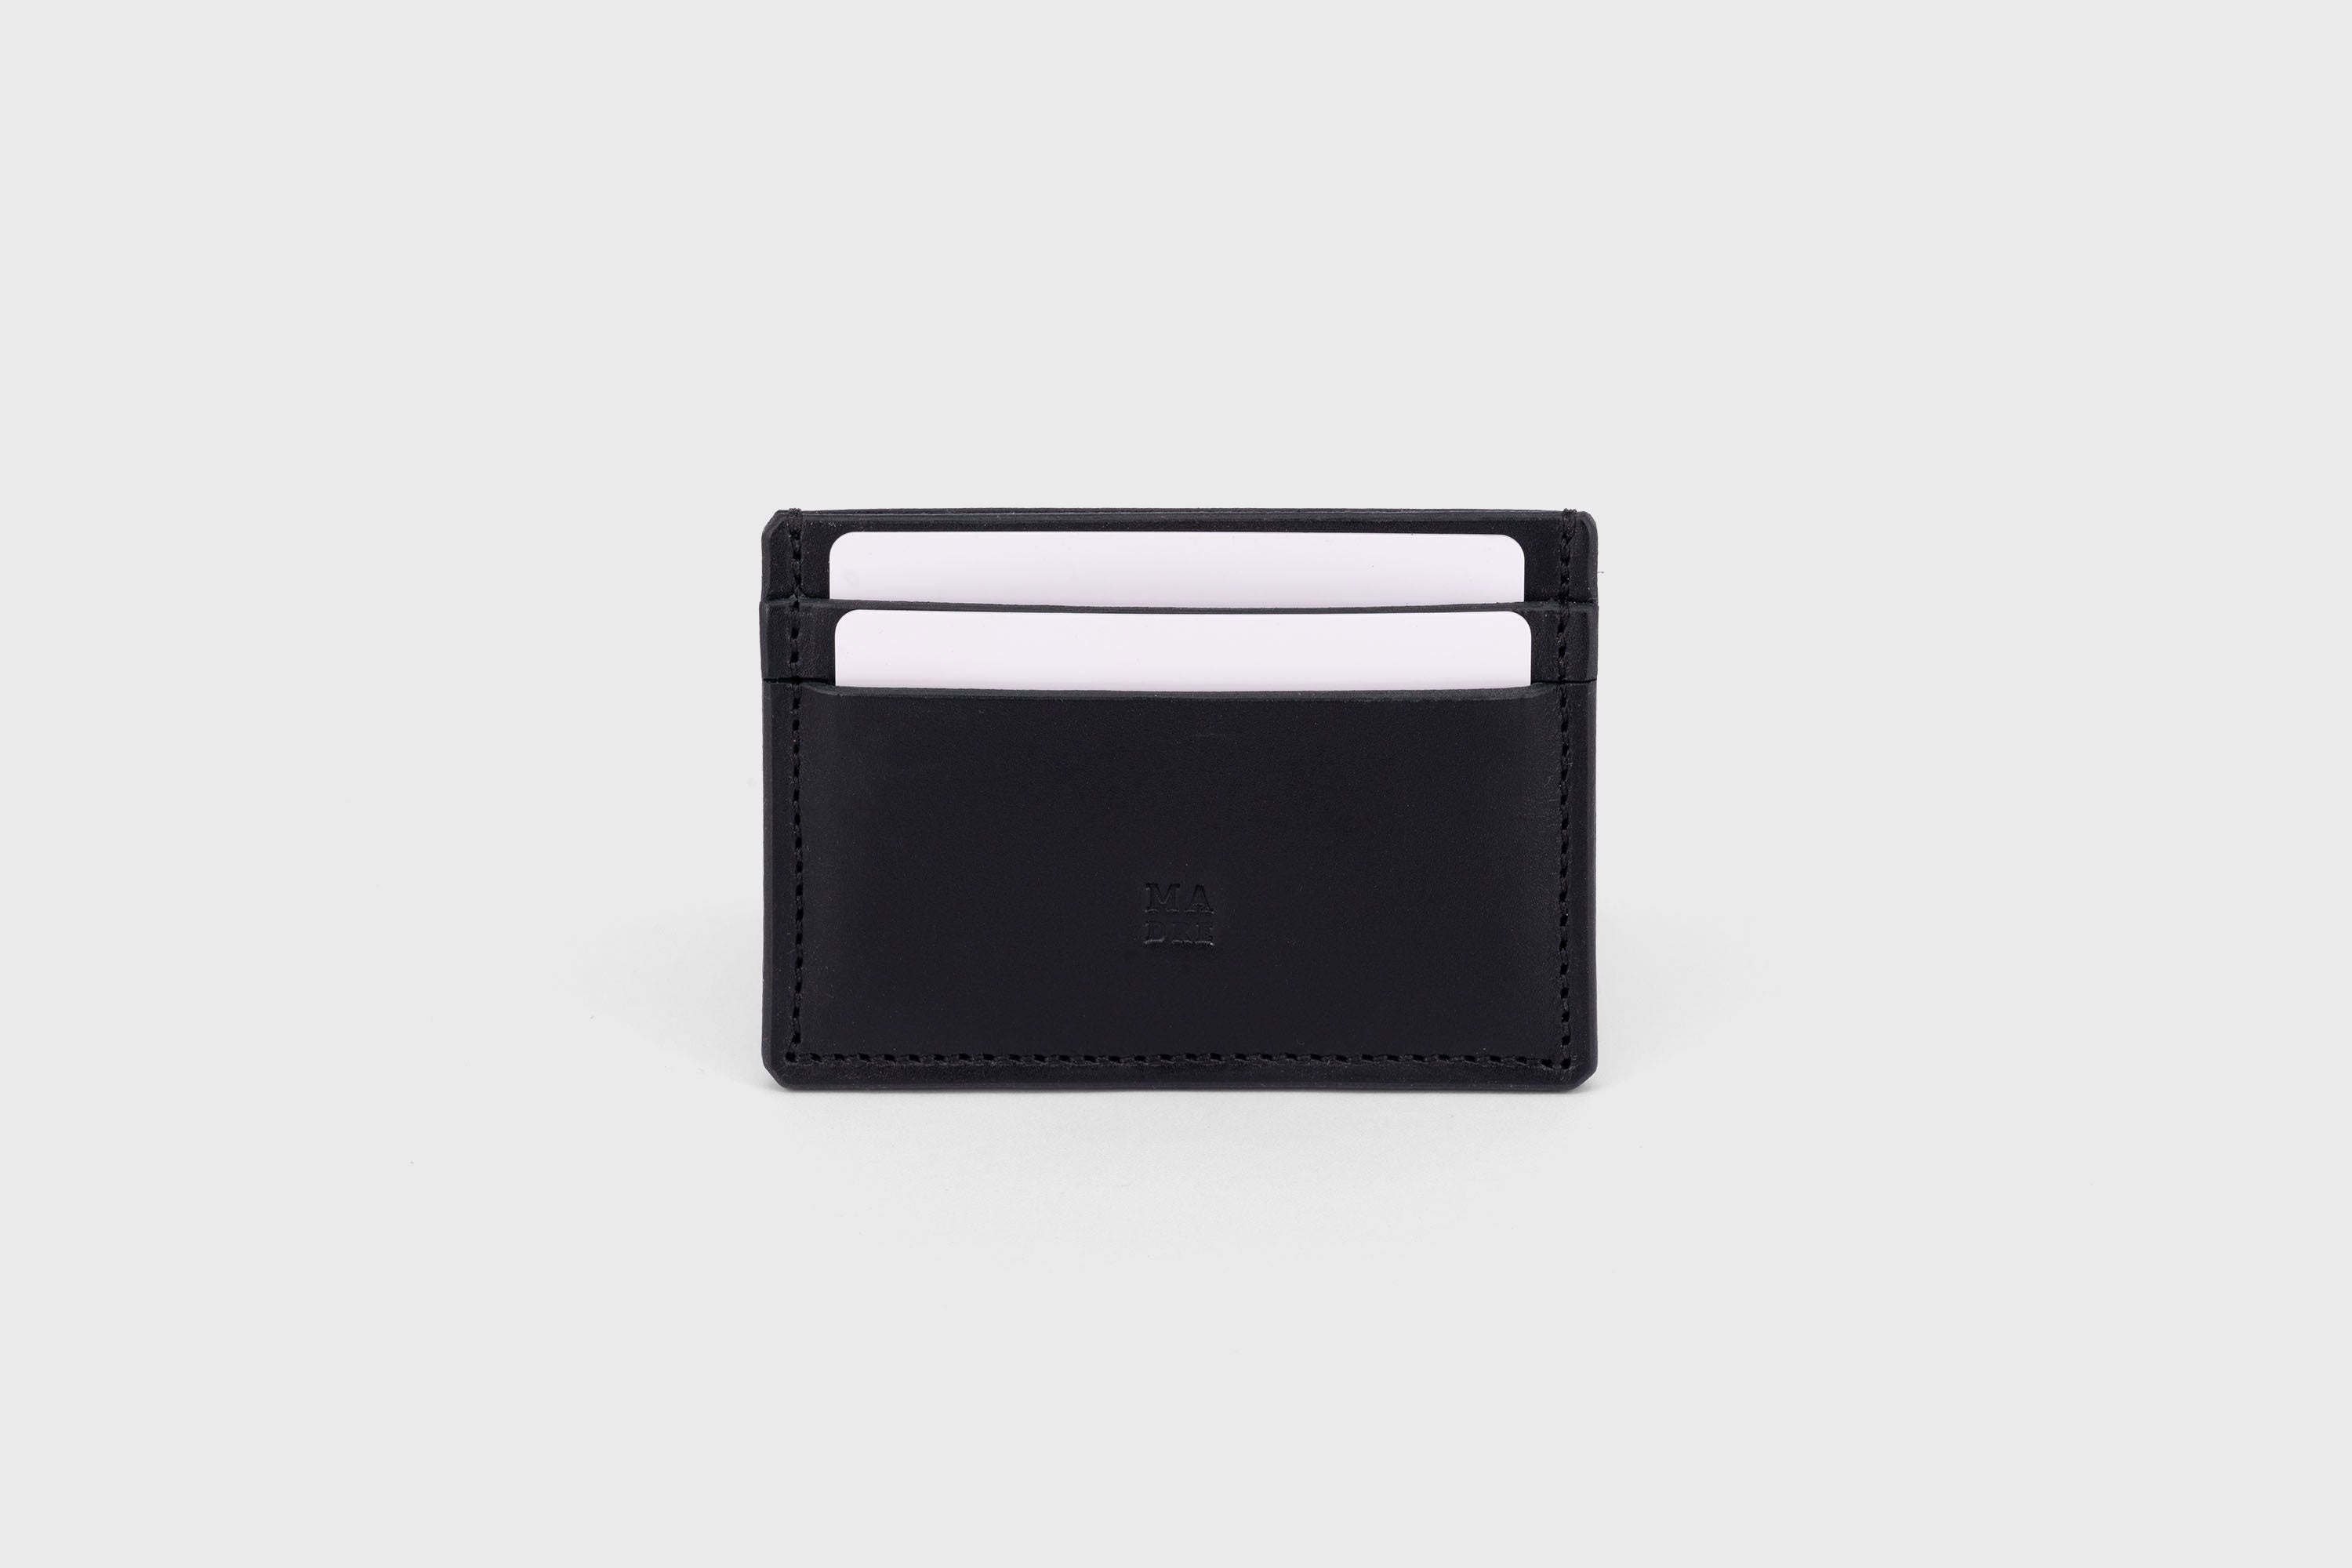 Credit Card Wallet in Black Leather Vachetta Vegetable Tanned Leather Handmade and Design by Atelier Madre Manuel Dreesmann Barcelona Spain